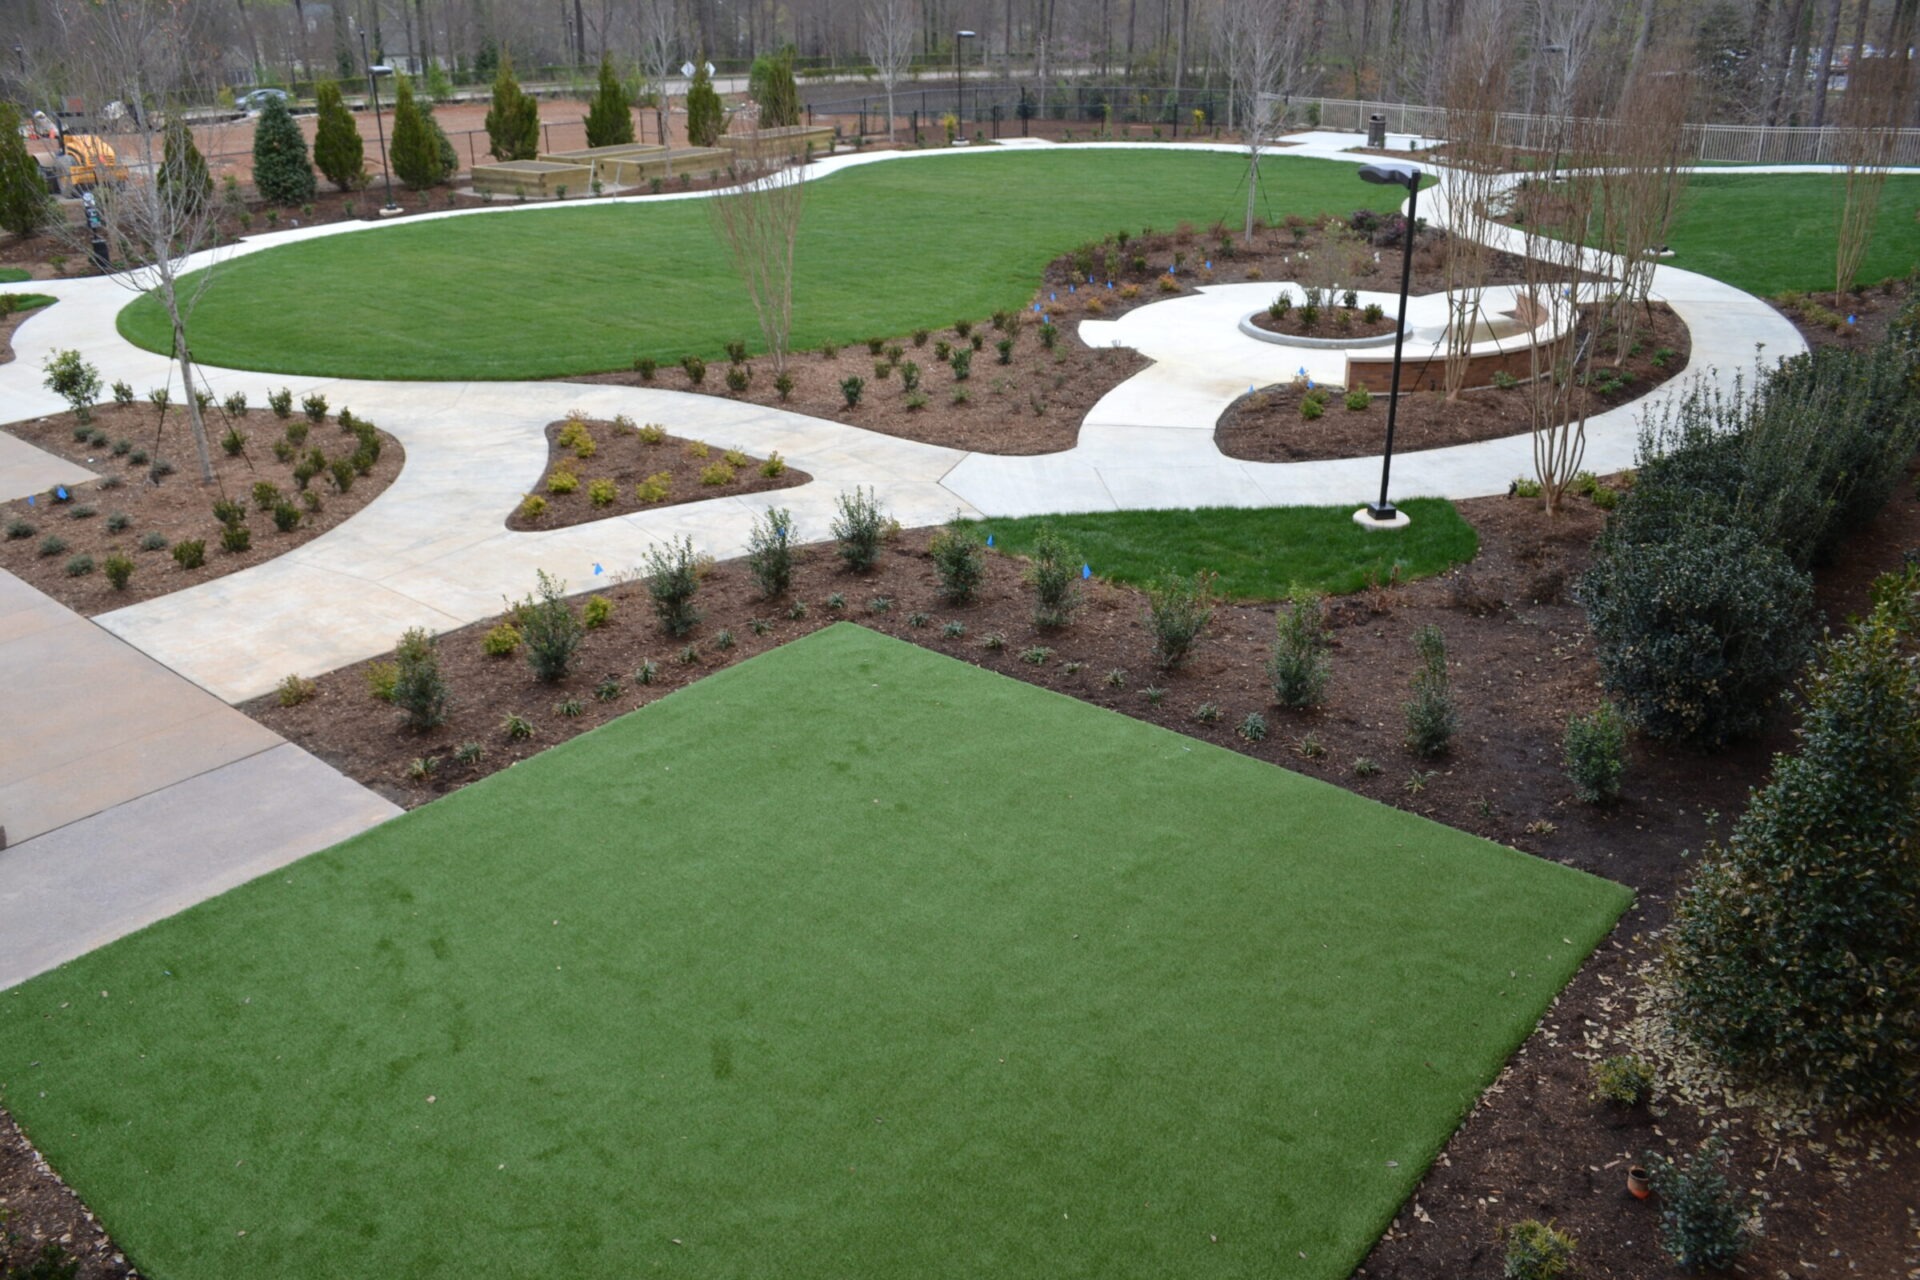 Newly landscaped park with curving pathways, green lawns, young trees, and mulched garden beds under a cloudy sky. A streetlamp stands beside the path.